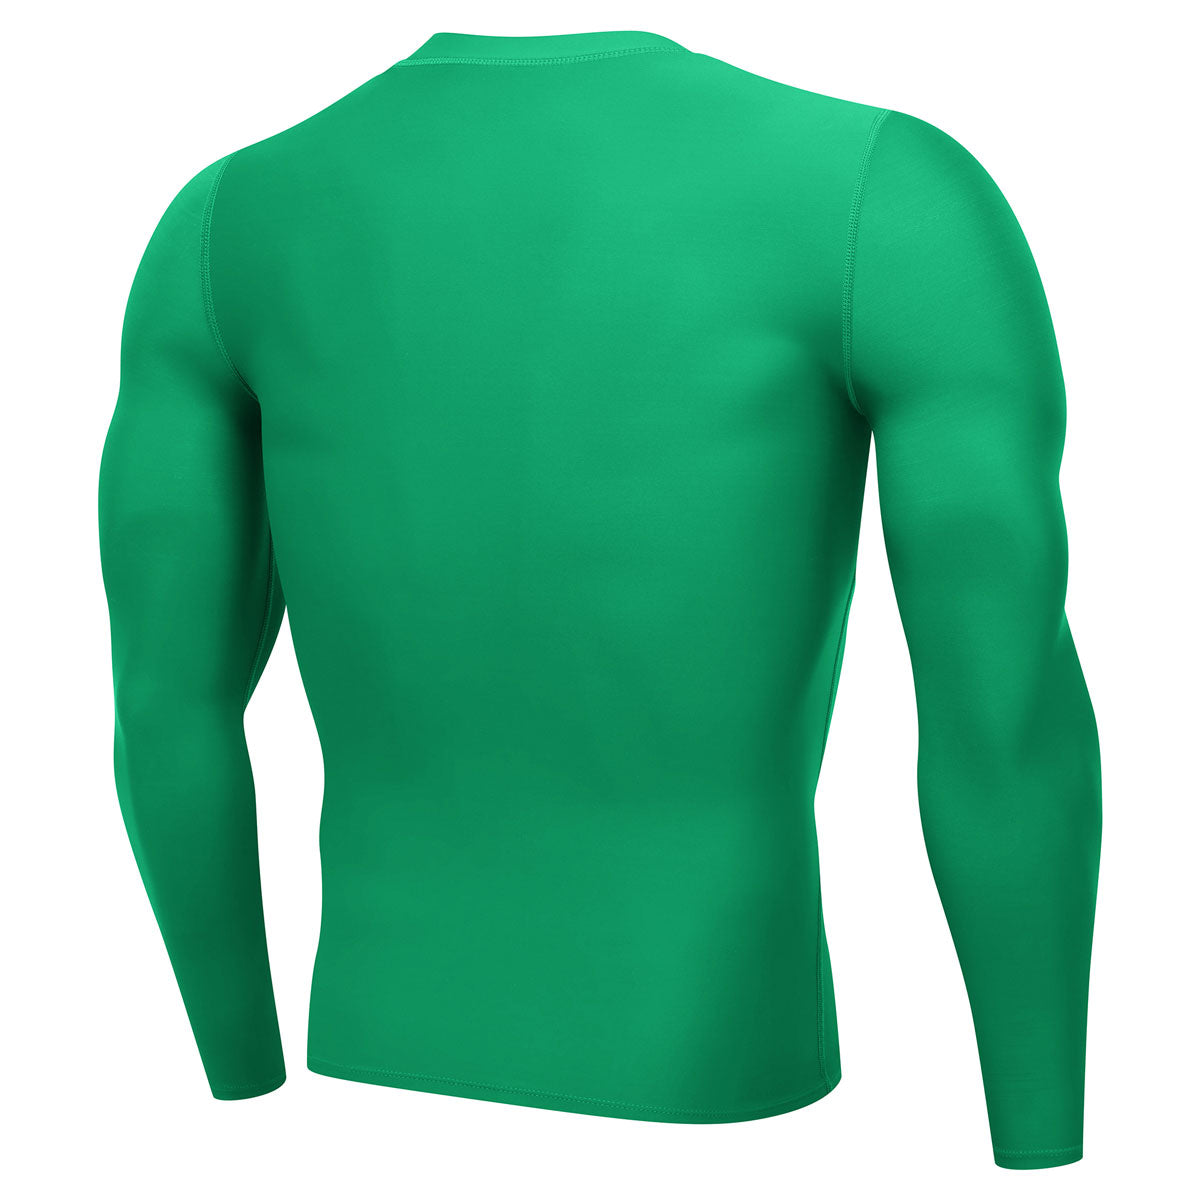 Atak Compression Recovery Long Sleeve Top - Adult - Green